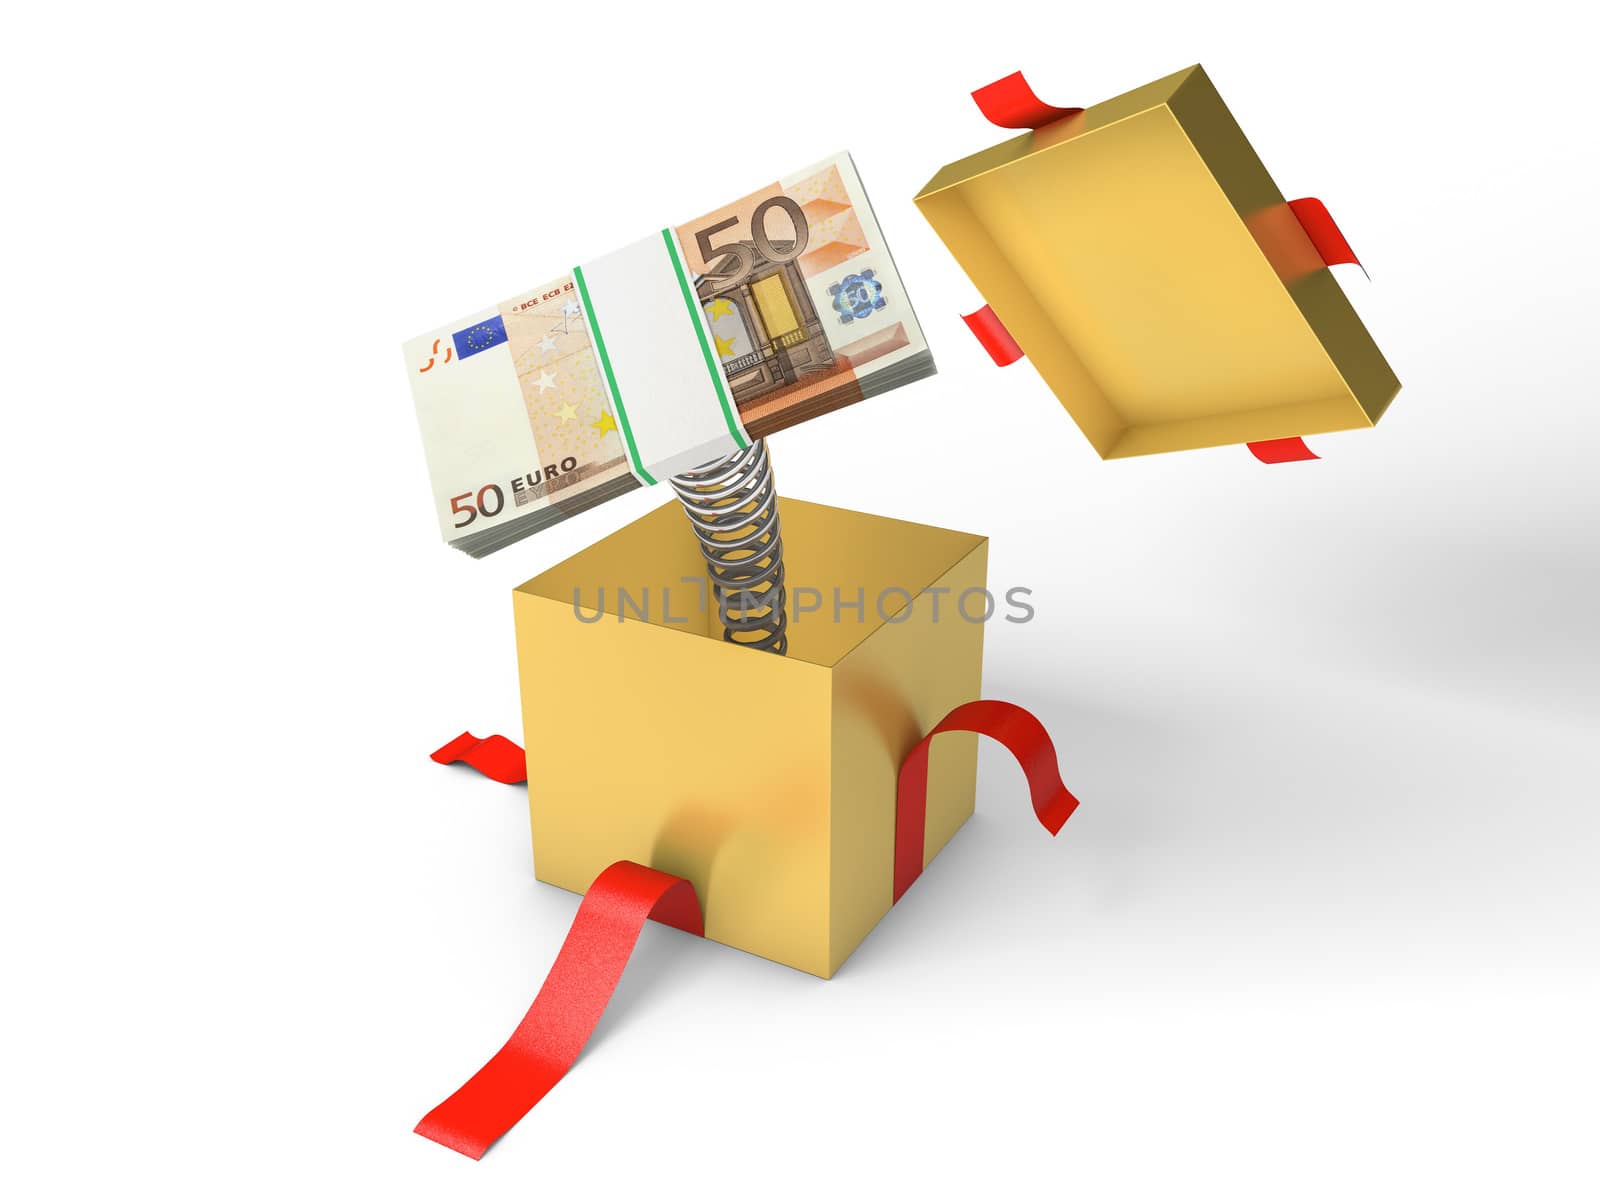 The stack of euro money jumps out of a gift box on a spring